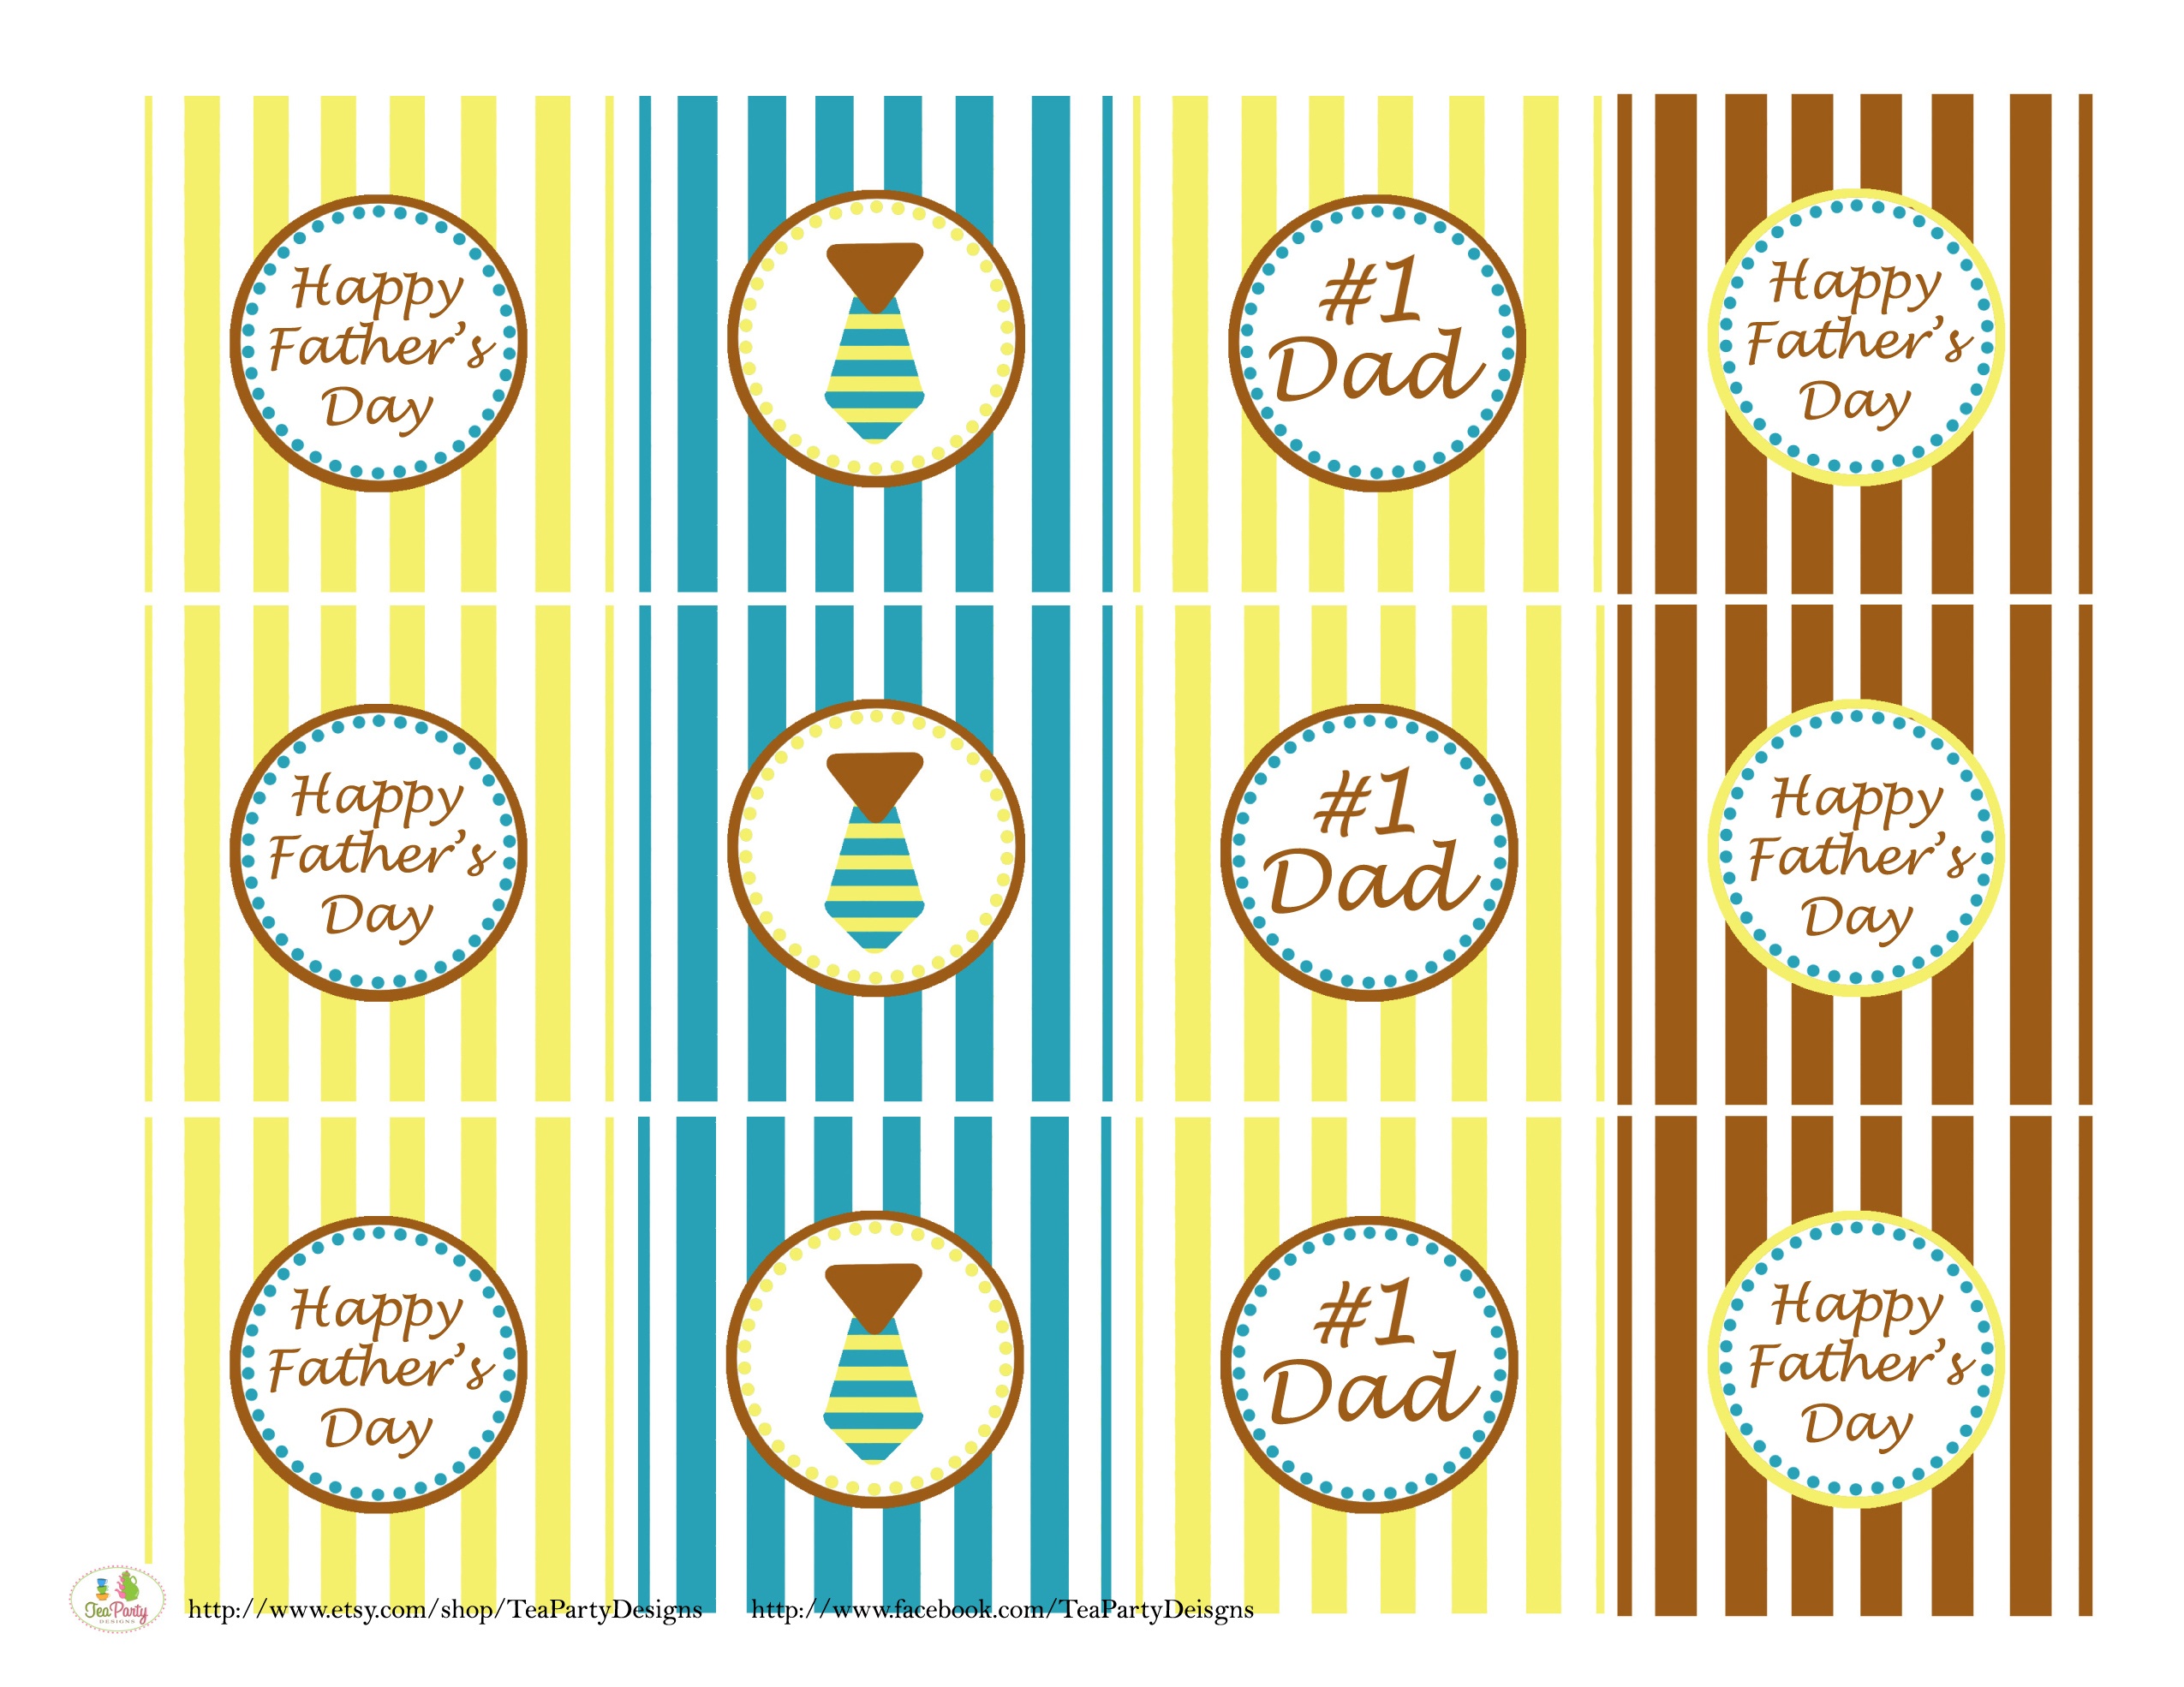 Free Father&amp;#039;s Day Printables From Tea Party Designs | Catch My Party - Free Printable Party Circles